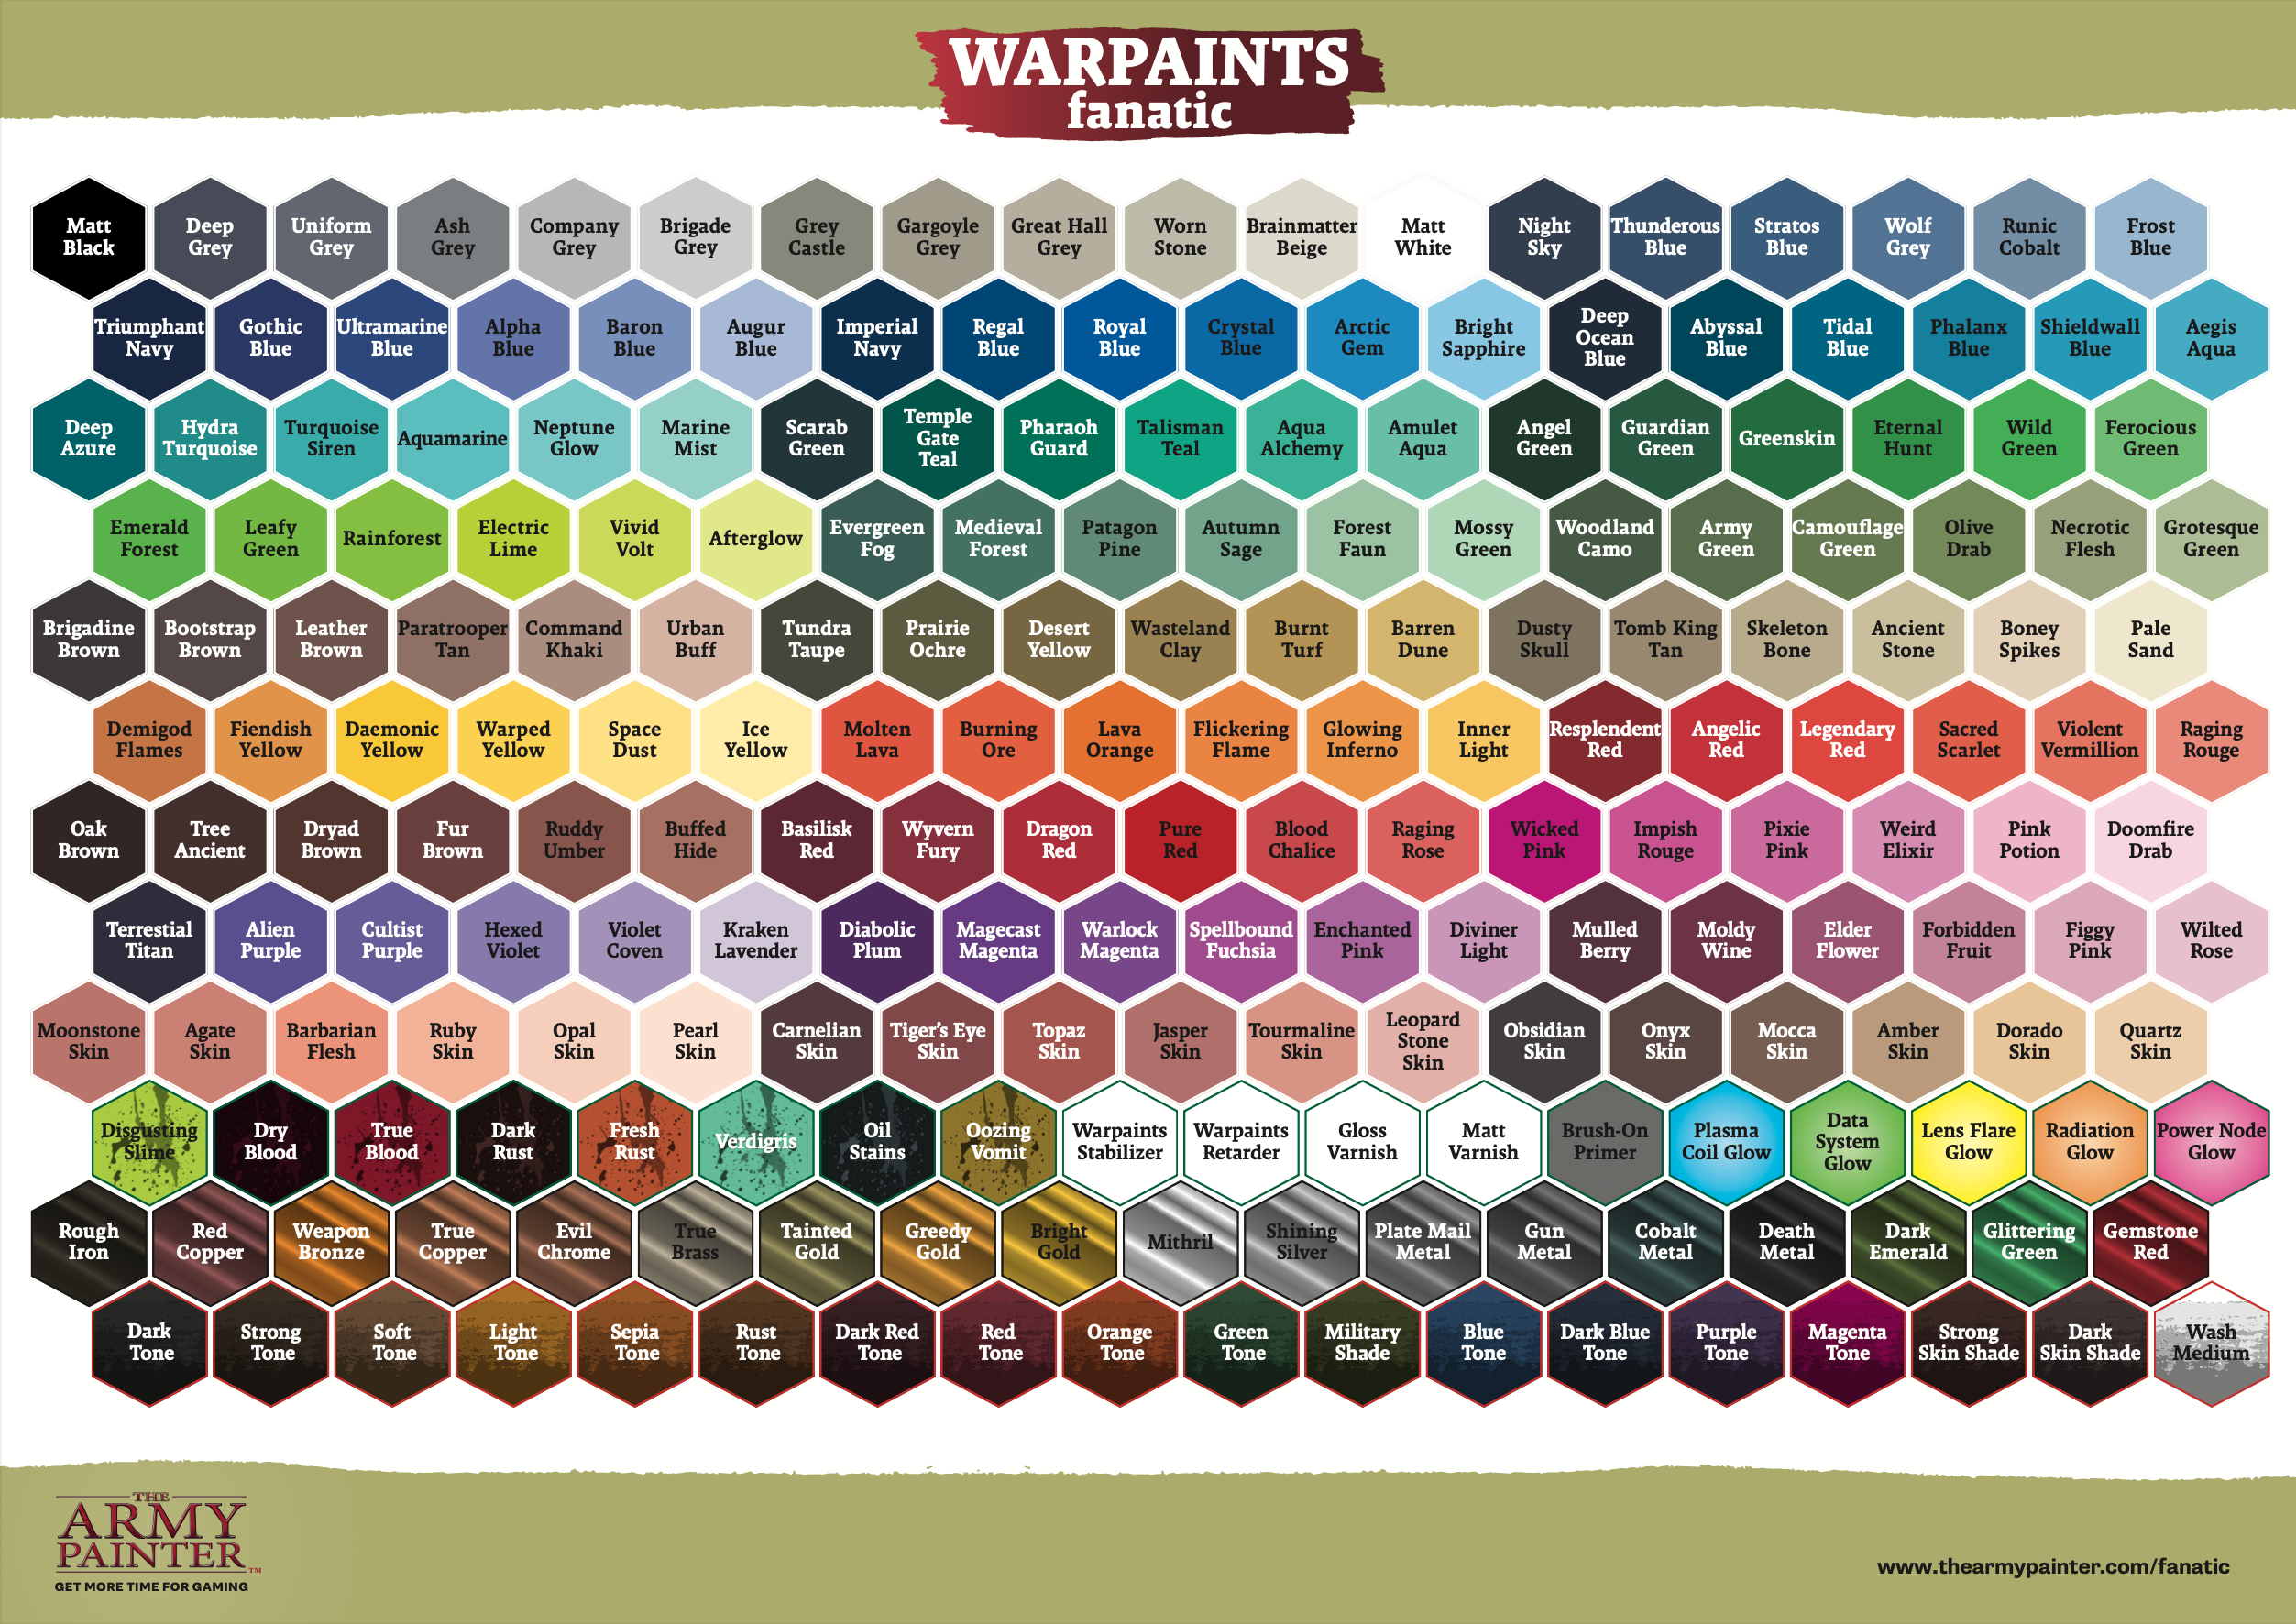 Army Painter Warpaints Fanatic: Ice Yellow 18ml - Loaded Dice